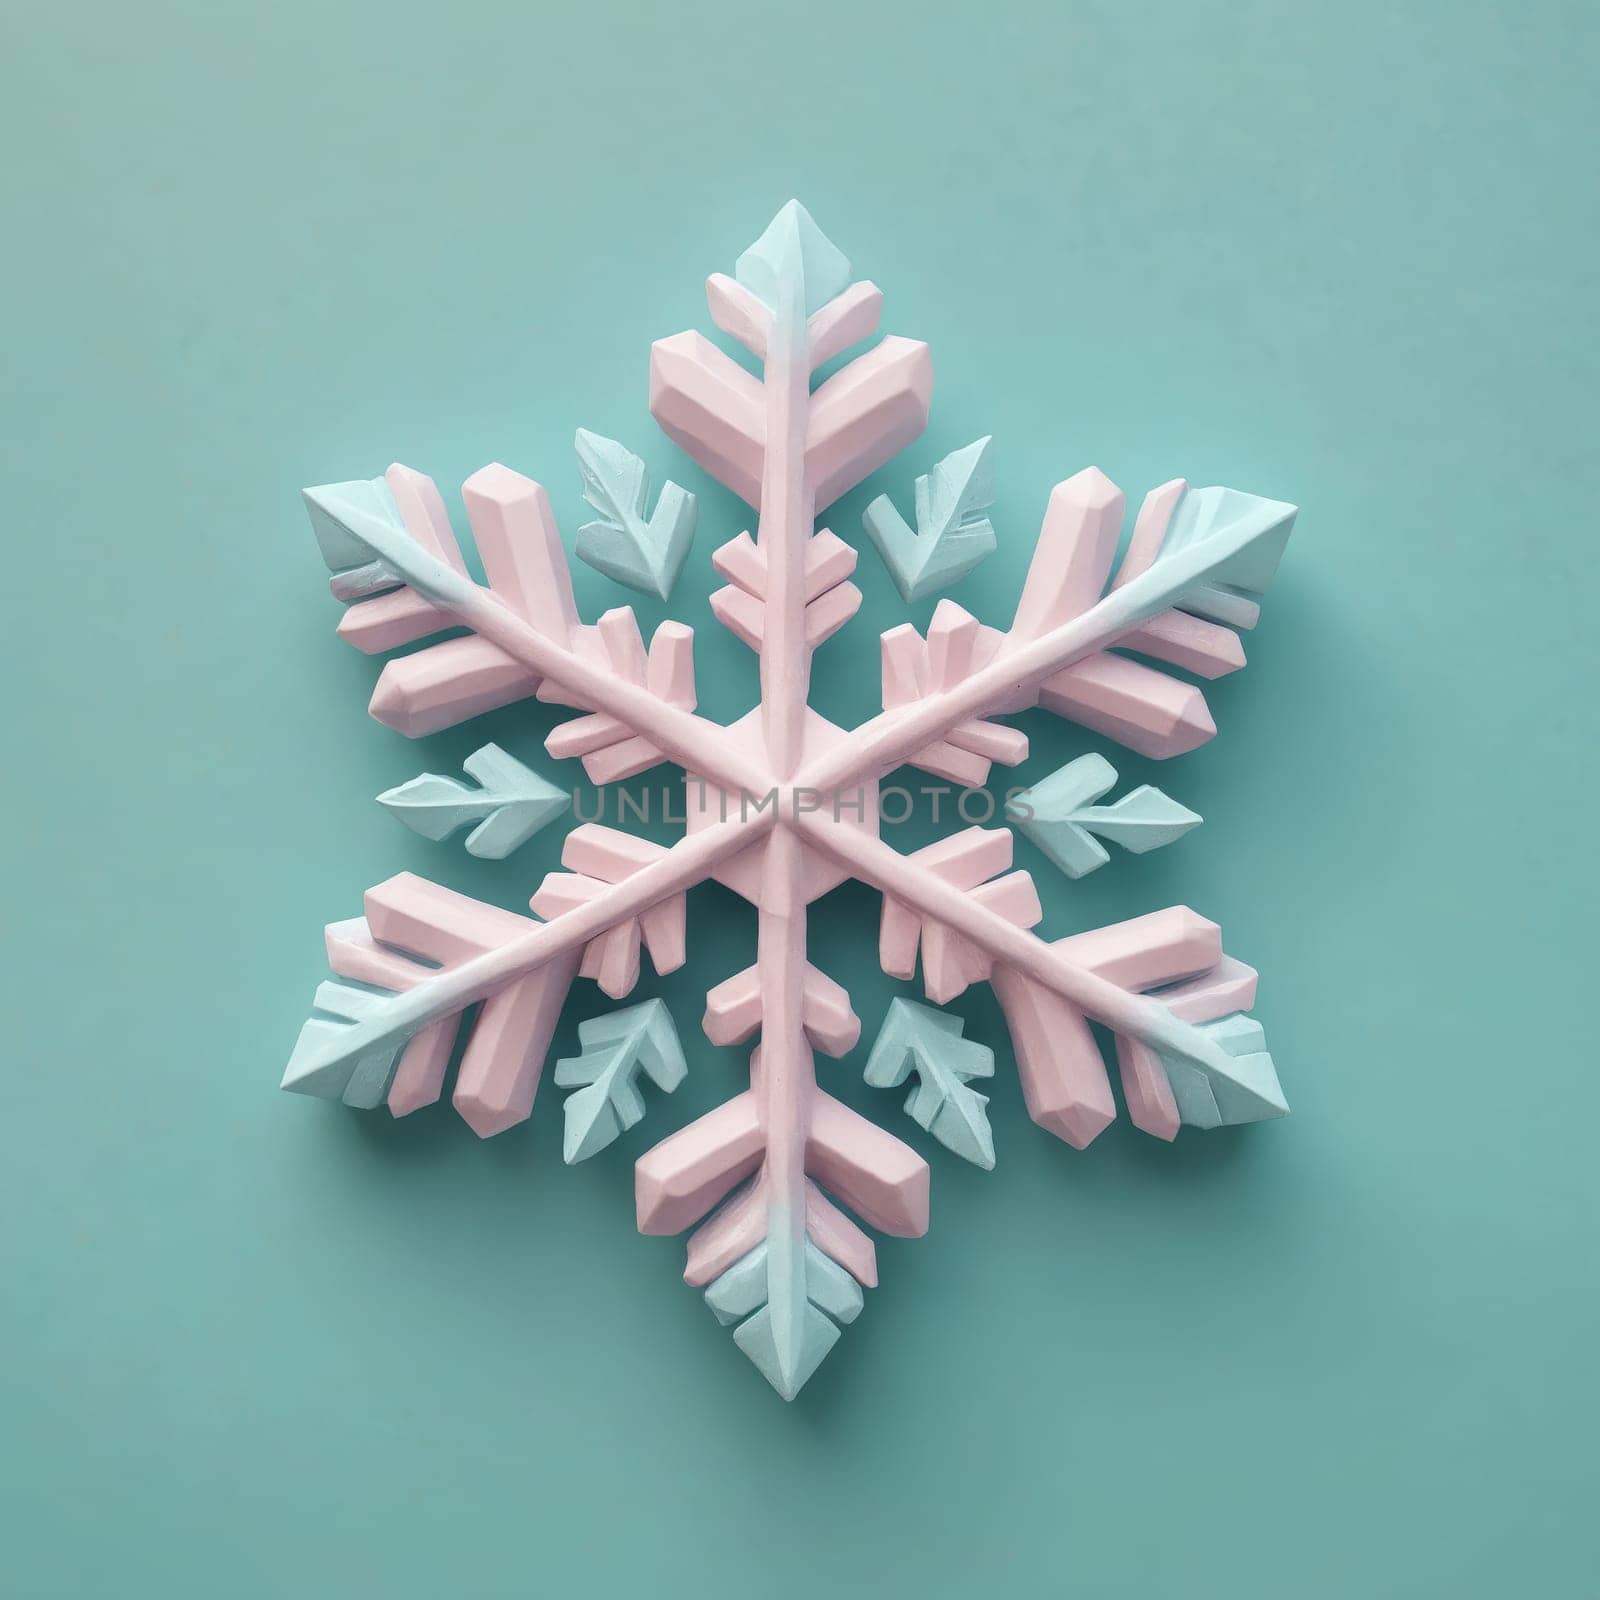 A blue and pink snowflake ornament made of nickel and metal, designed with a pattern resembling an evergreen twig on a pink background. A trendy fashion accessory inspired by natural materials